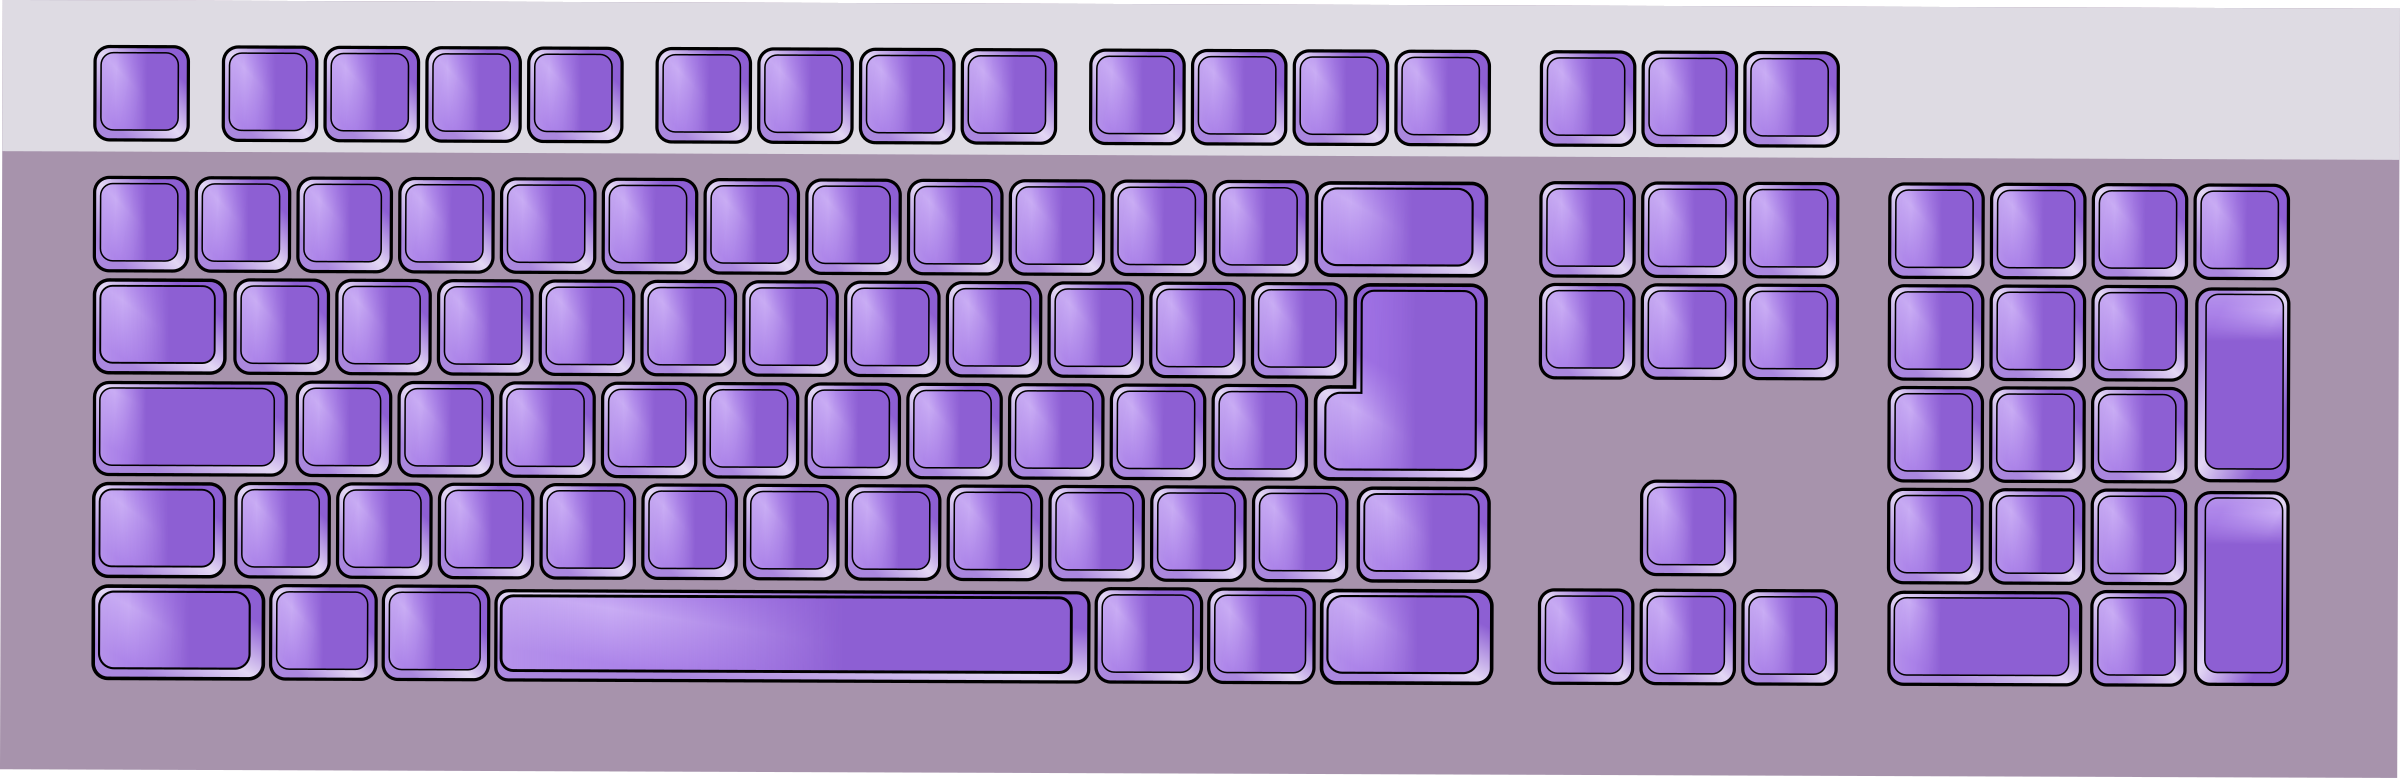 clipart of keyboard - photo #30